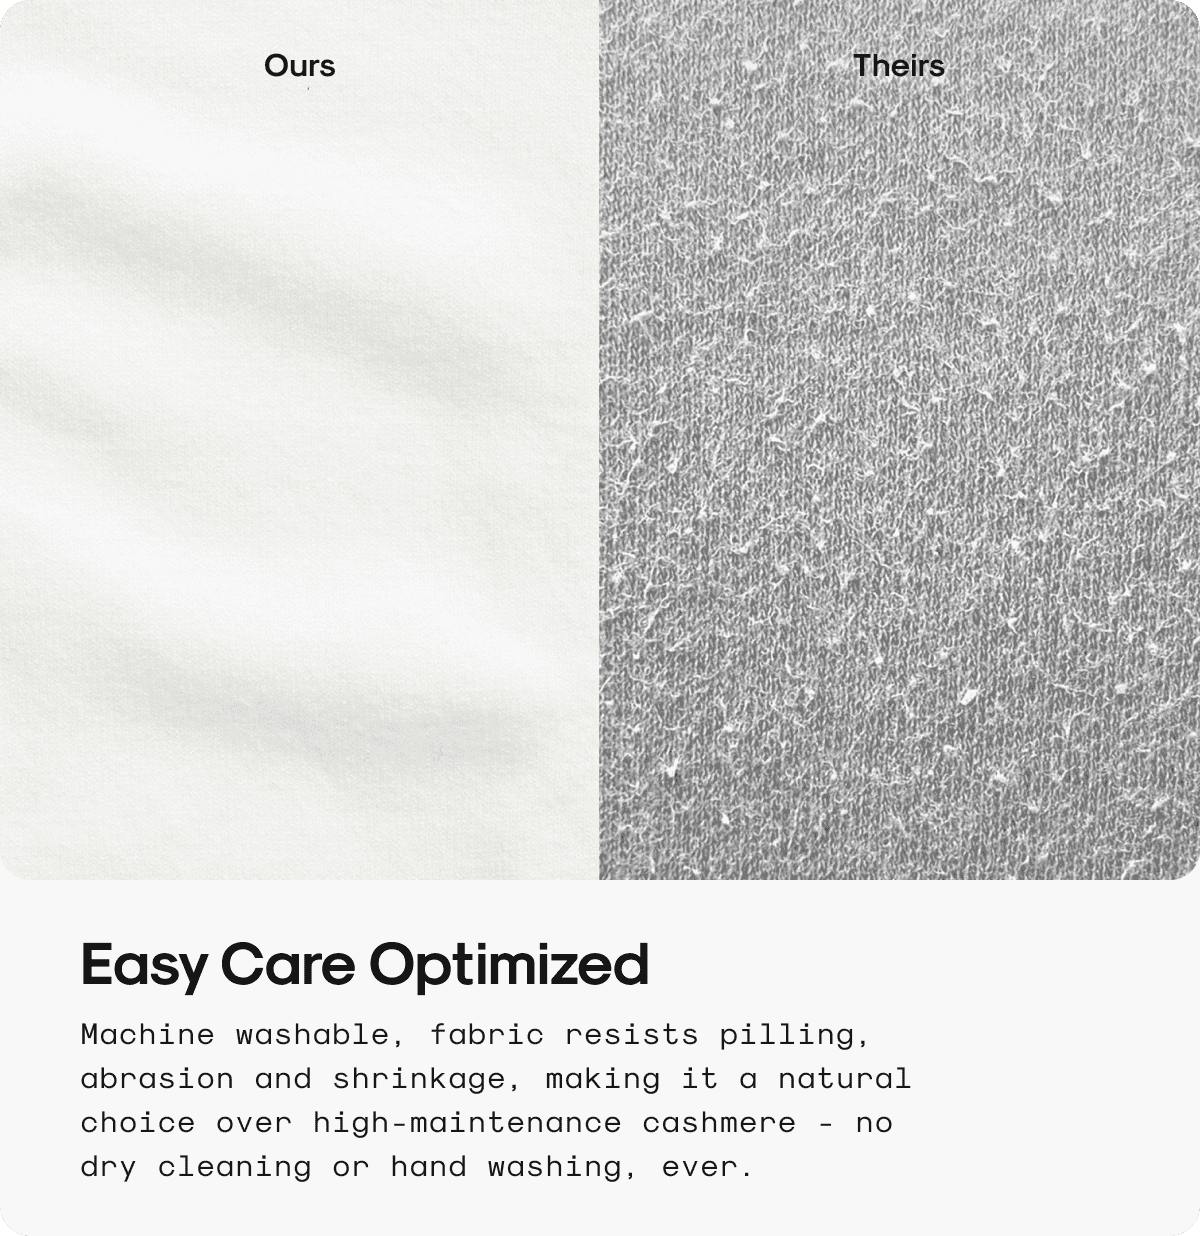 Easy Care Optimized